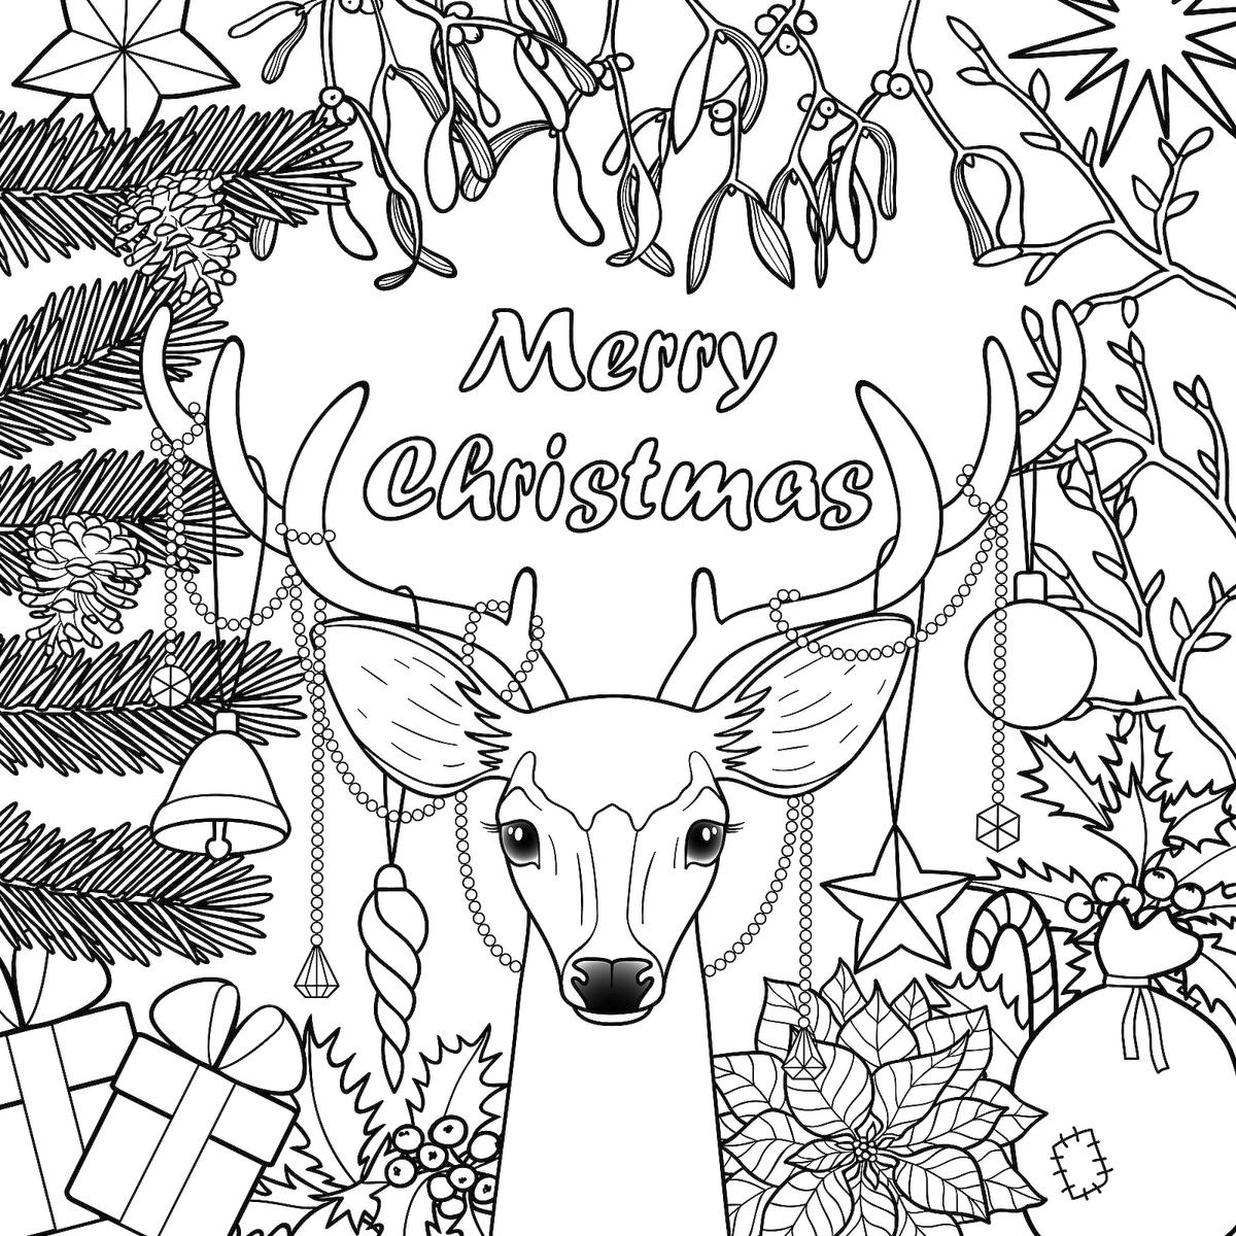 Get This Adult Christmas Coloring Pages Free to Print Reindeer Card plm6